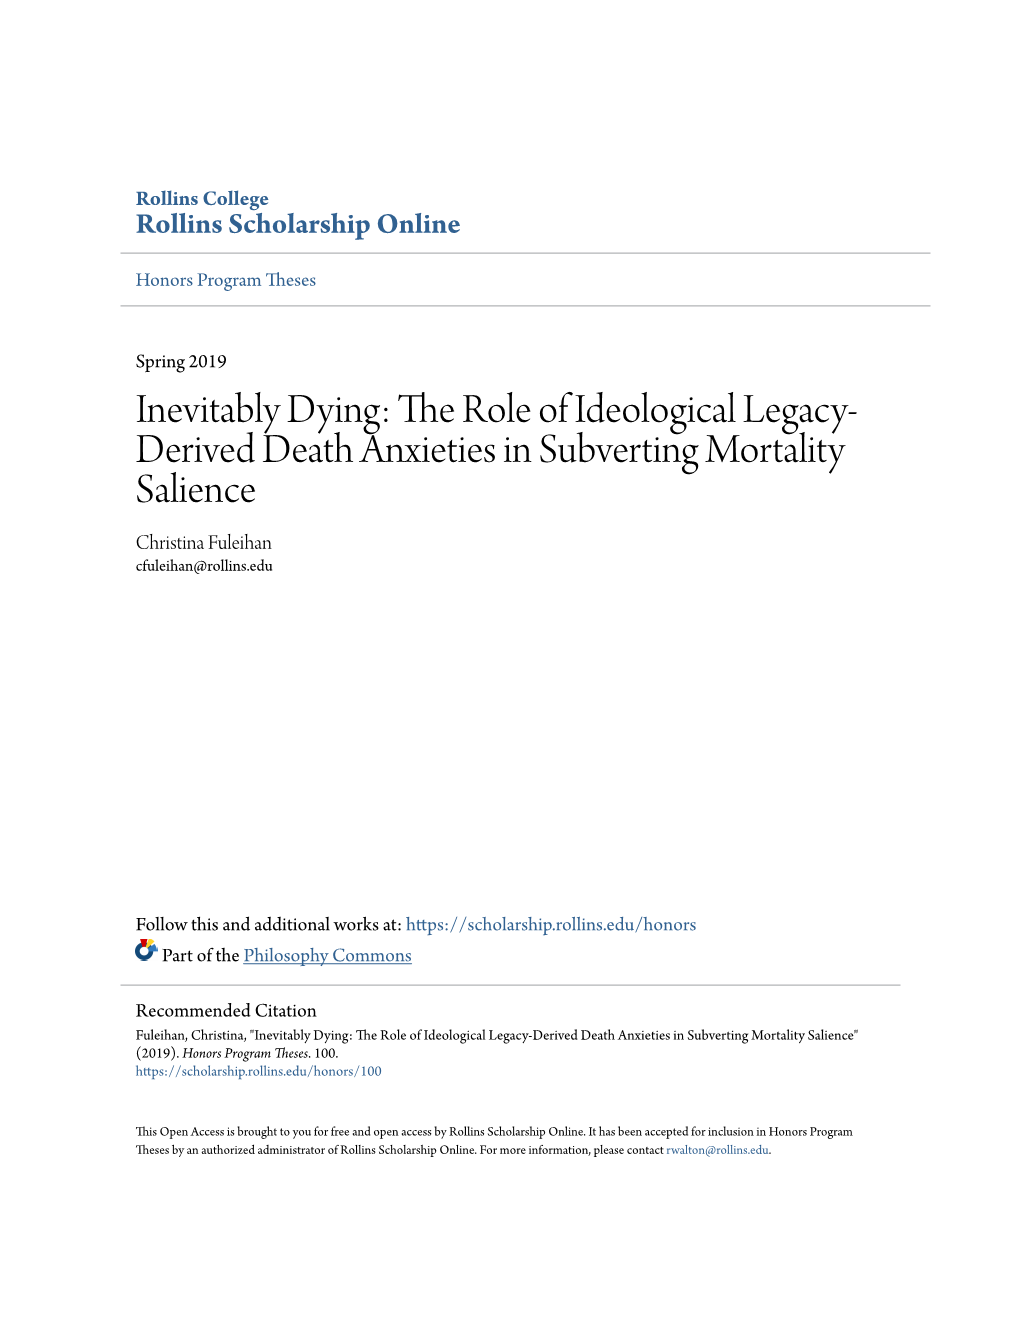 Inevitably Dying: the Role of Ideological Legacy-Derived Death Anxieties in Subverting Mortality Salience" (2019)